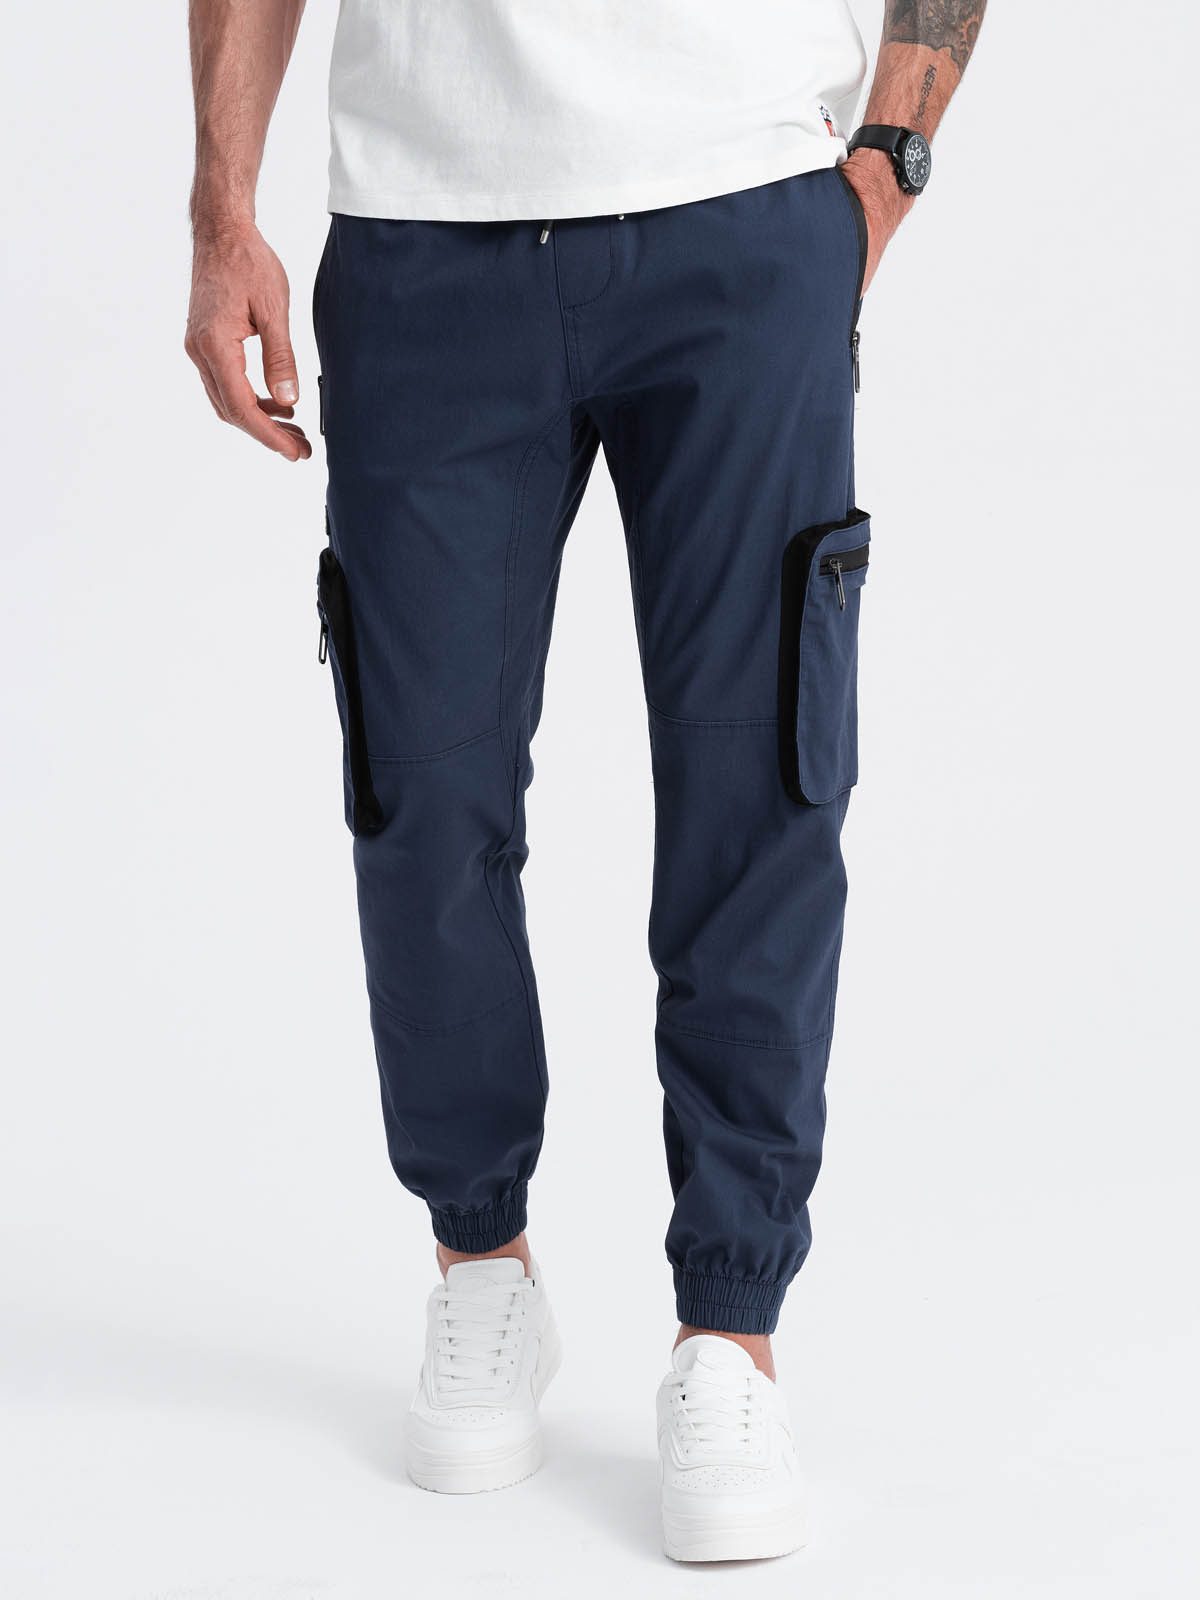 Ombre Men's JOGGER pants with zippered cargo pockets - navy blue